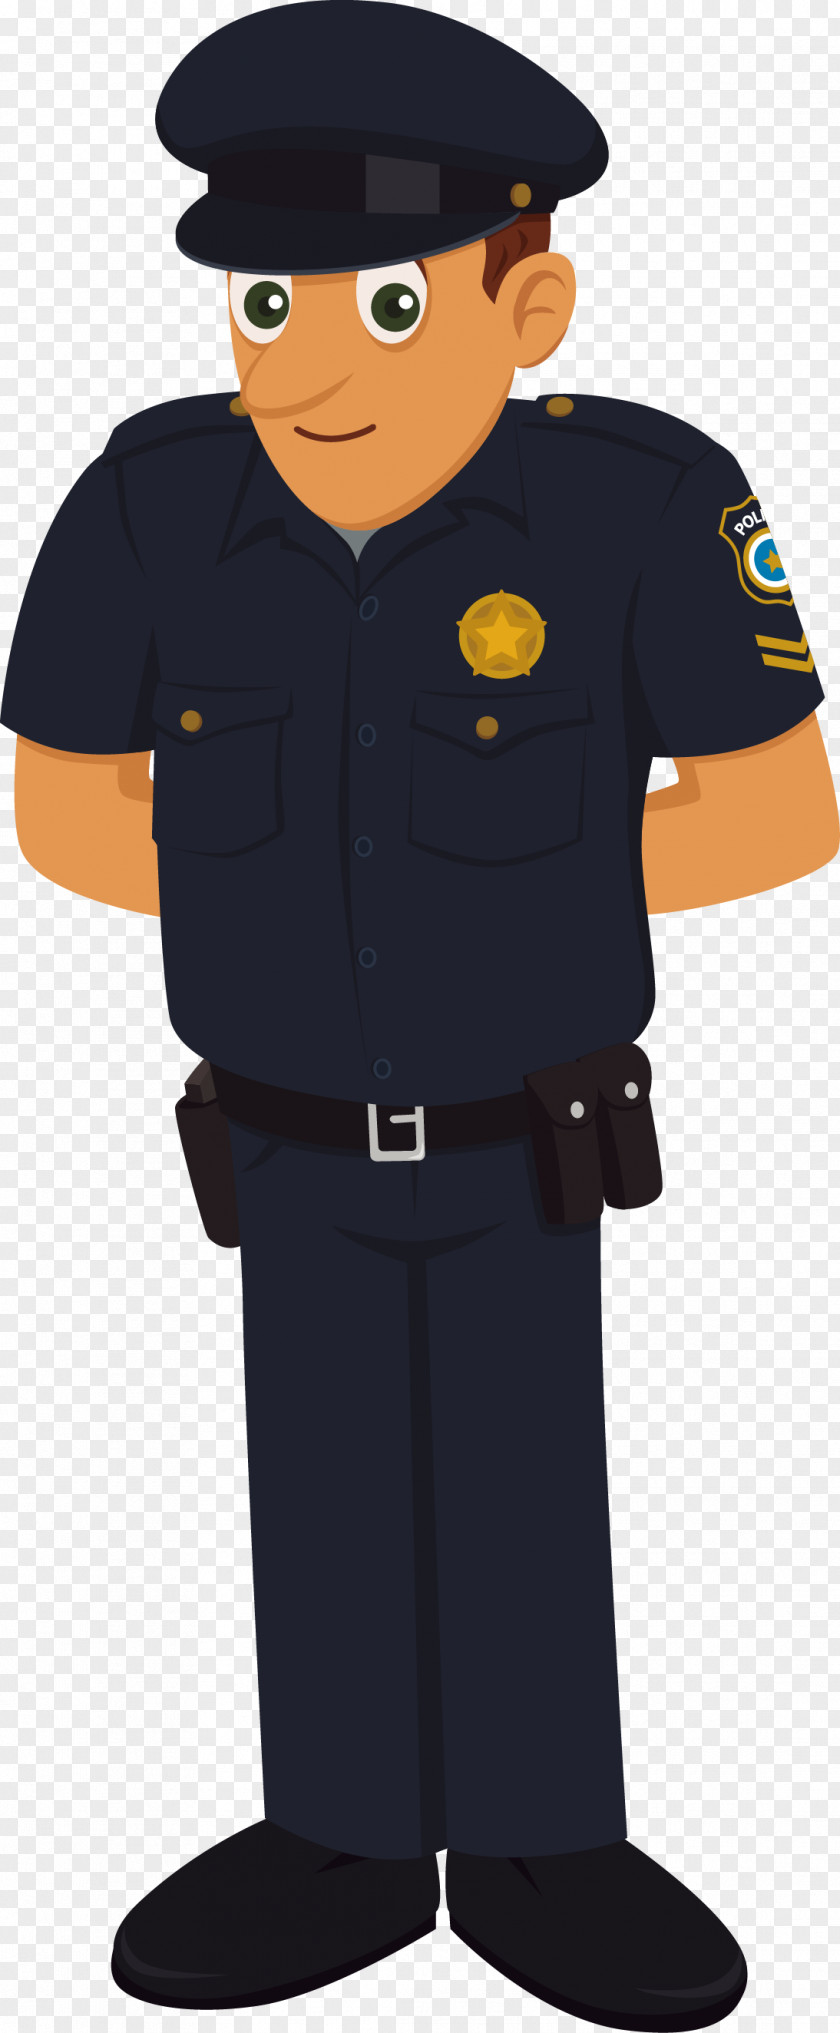 Vector Police Officer Uniforms Of The United States Clip Art PNG